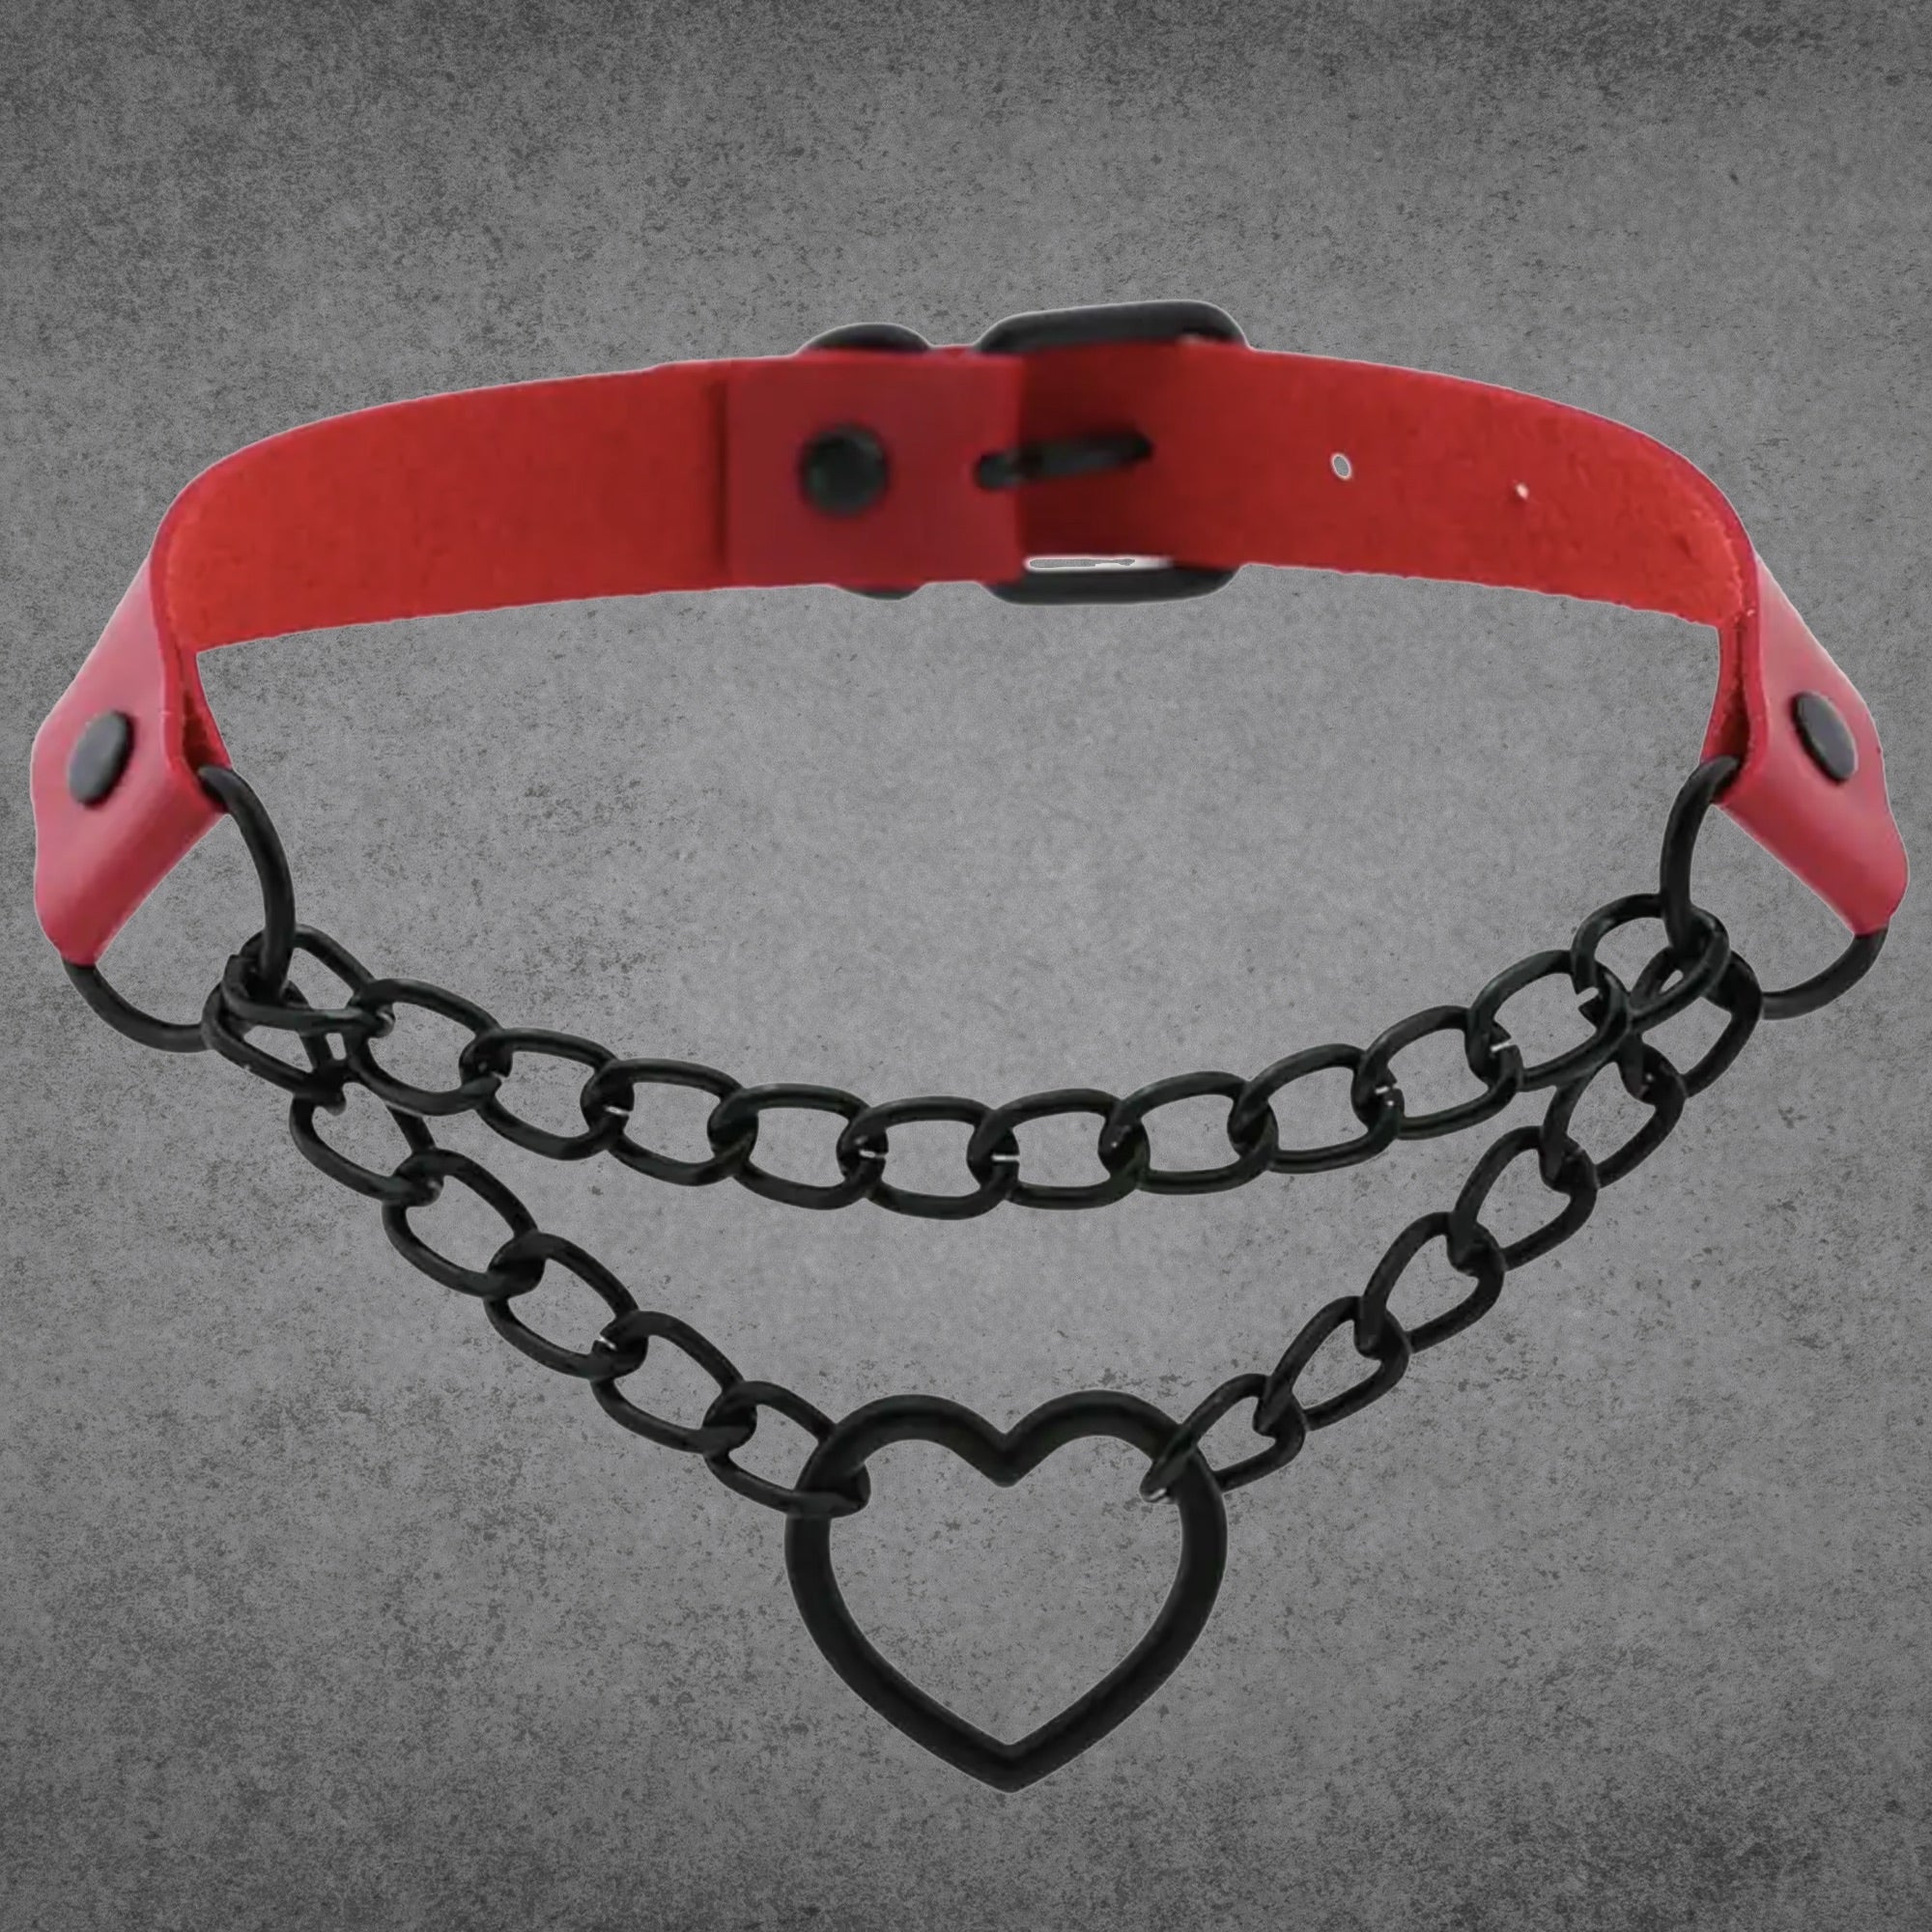 Chained Heart Choker - Red & Black